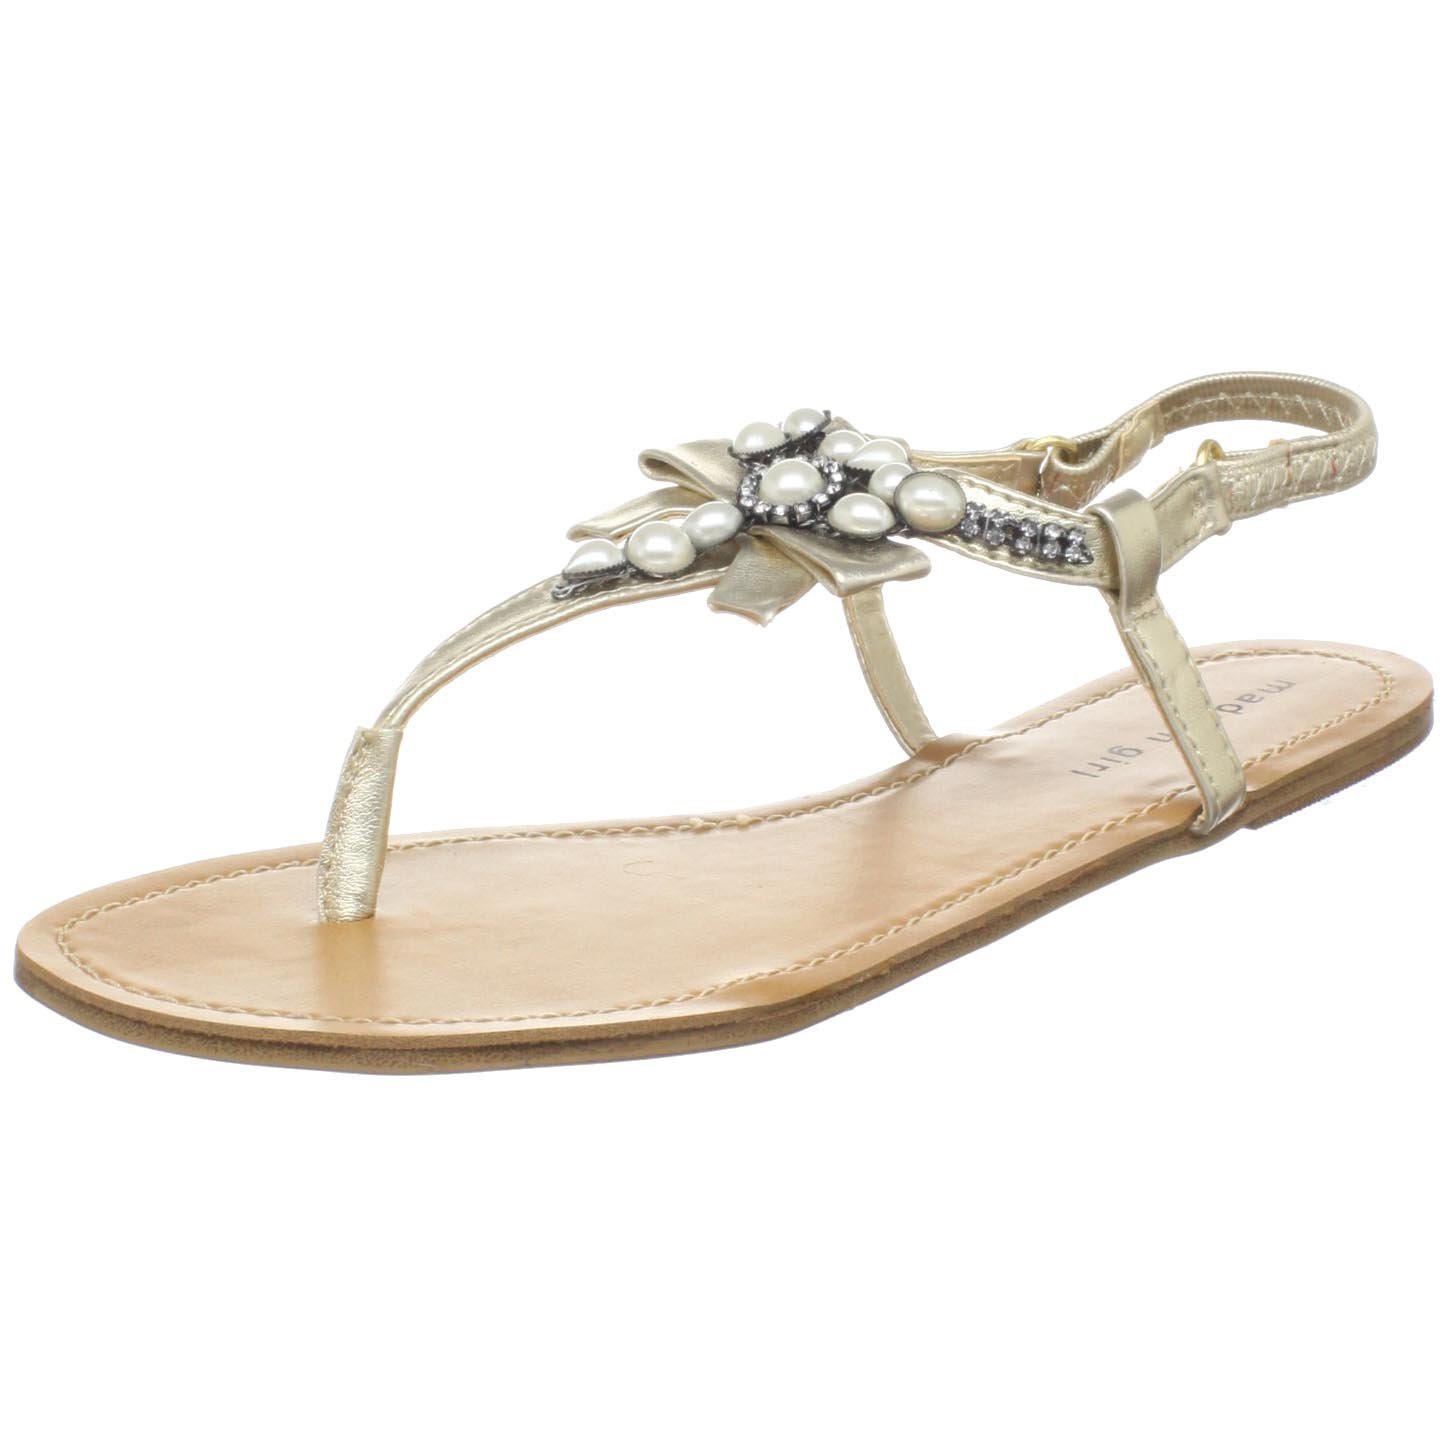 Aimee's Picks for the Best Designs of Elegant Thongs and Sandals: Cream ...